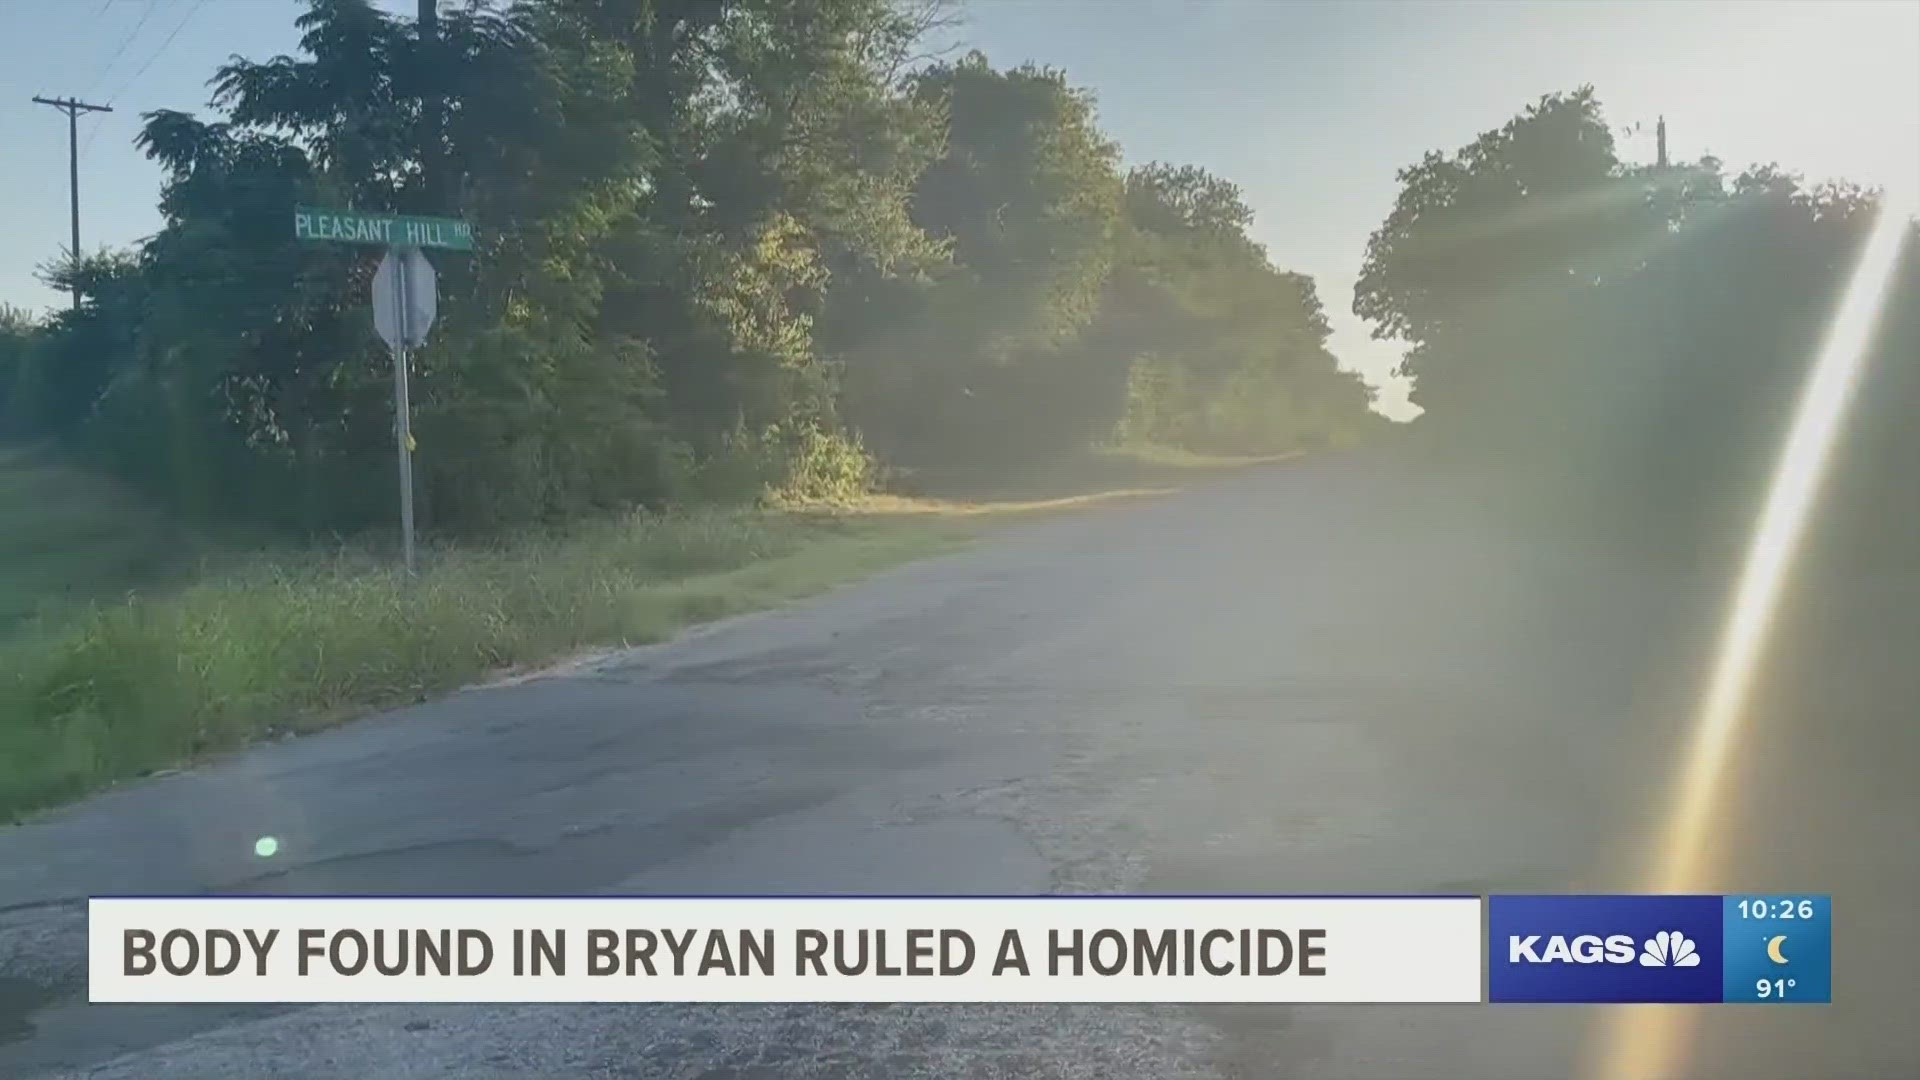 The previously reported suspicious death of a person on Wednesday on Pleasant Hill Road has now turned into a homicide investigation by Brazos County authorities.